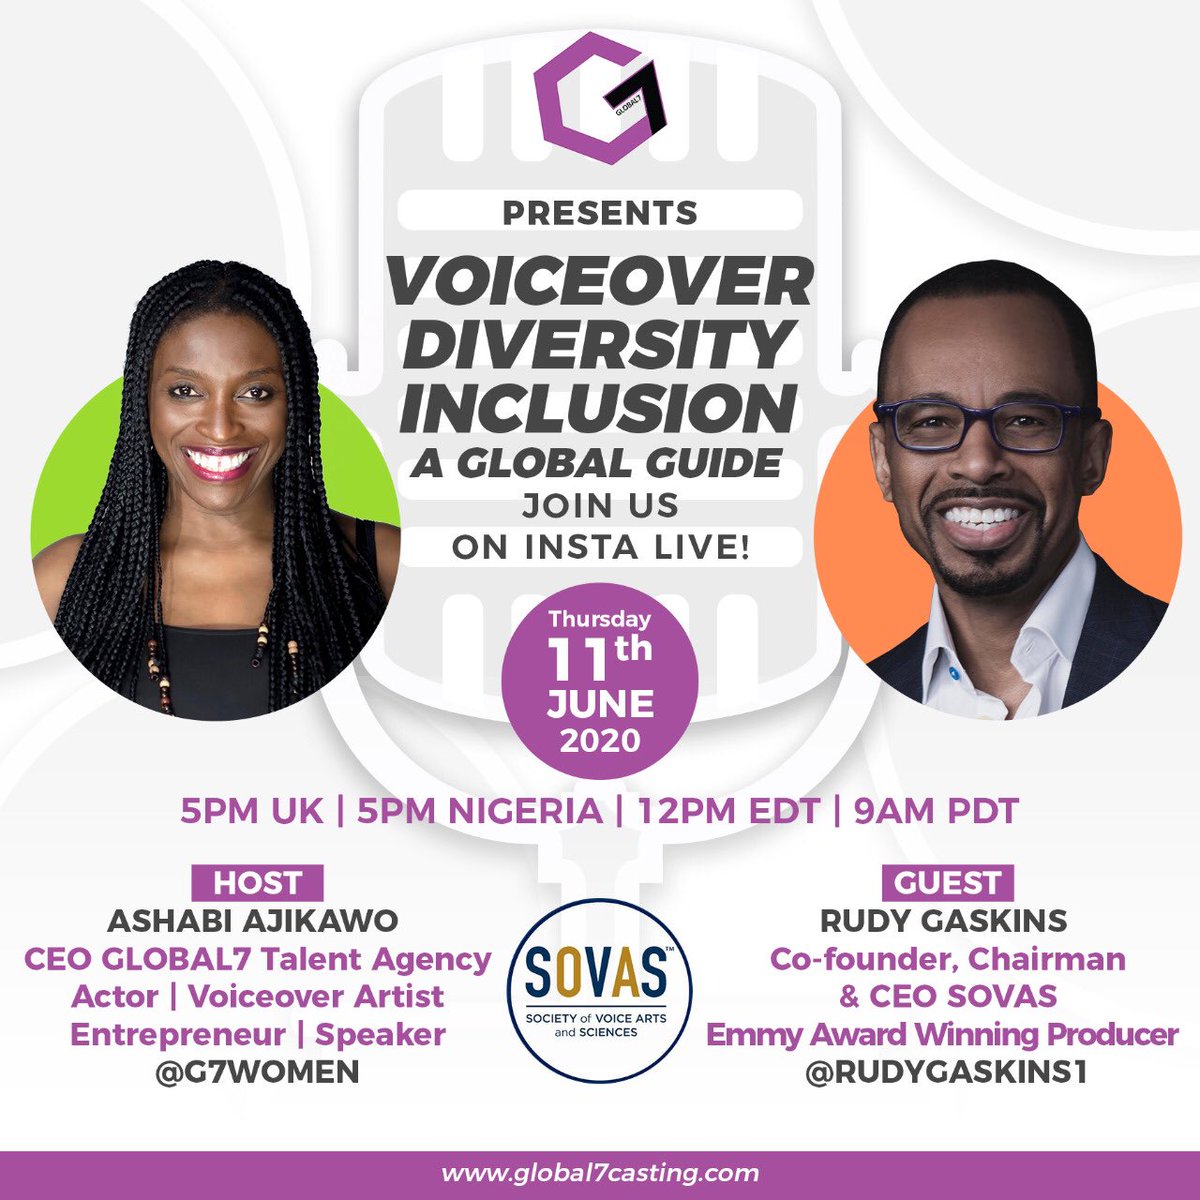 @rgaskins1 @Joanthevoice @SovasVoice Really looking forward to this! Please make sure you join us! #GLOBAL7 #RudyGaskins #JoanBaker #SOVAS #EmmyWinner #WorkingMums #Purpose #CEOMindset #Empowerment  #Equality #Diversity #Inclusion #Covid19 #VoiceOvers #VO #ActorsLife 💫